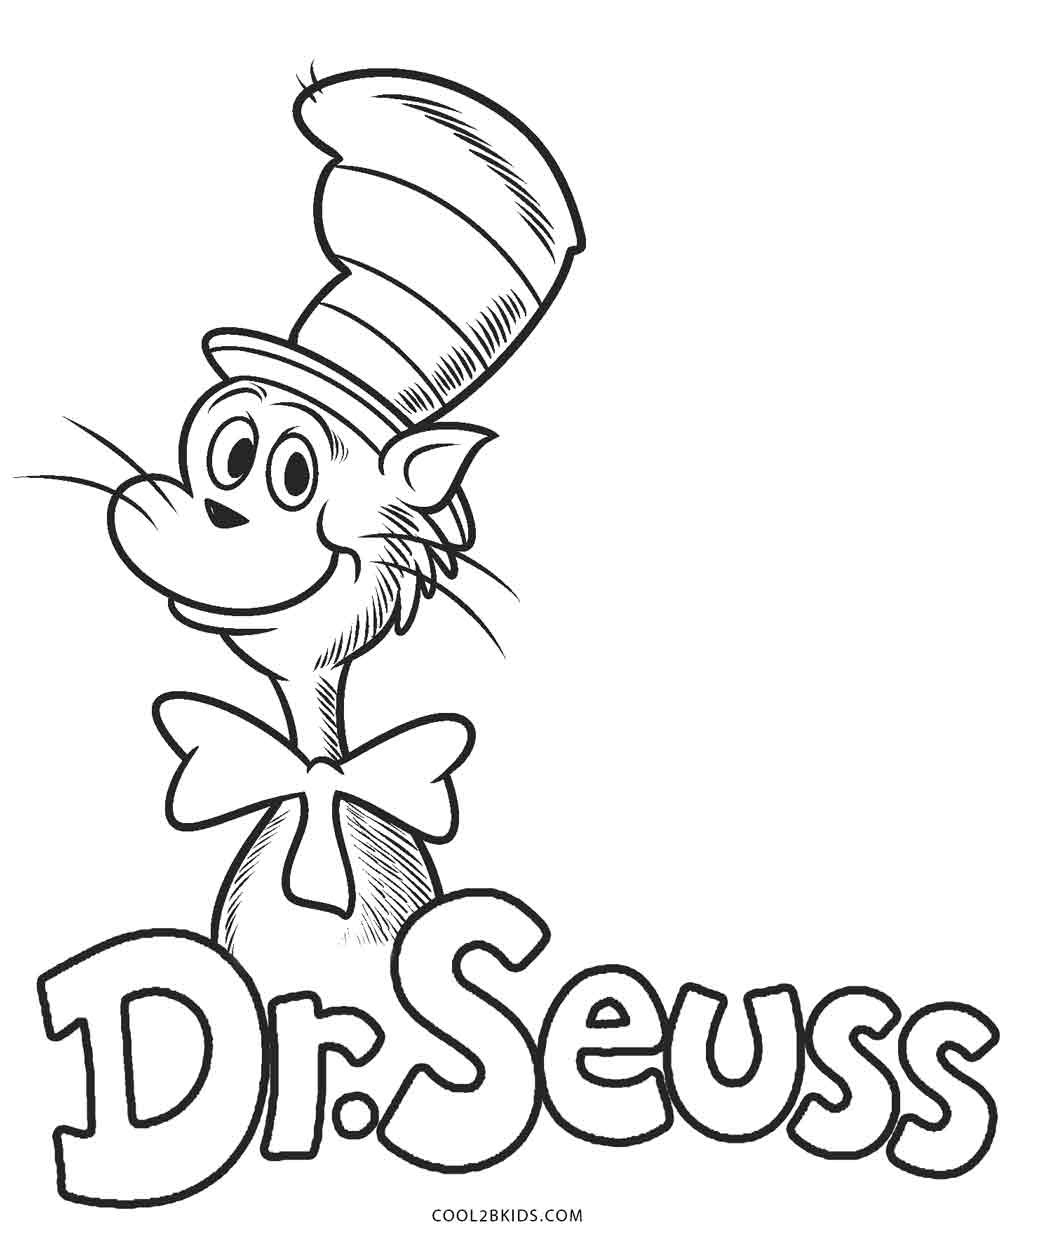 Dr Seuss Coloring Pages For Kids
 Free Printable Dr Seuss Coloring Pages For Kids